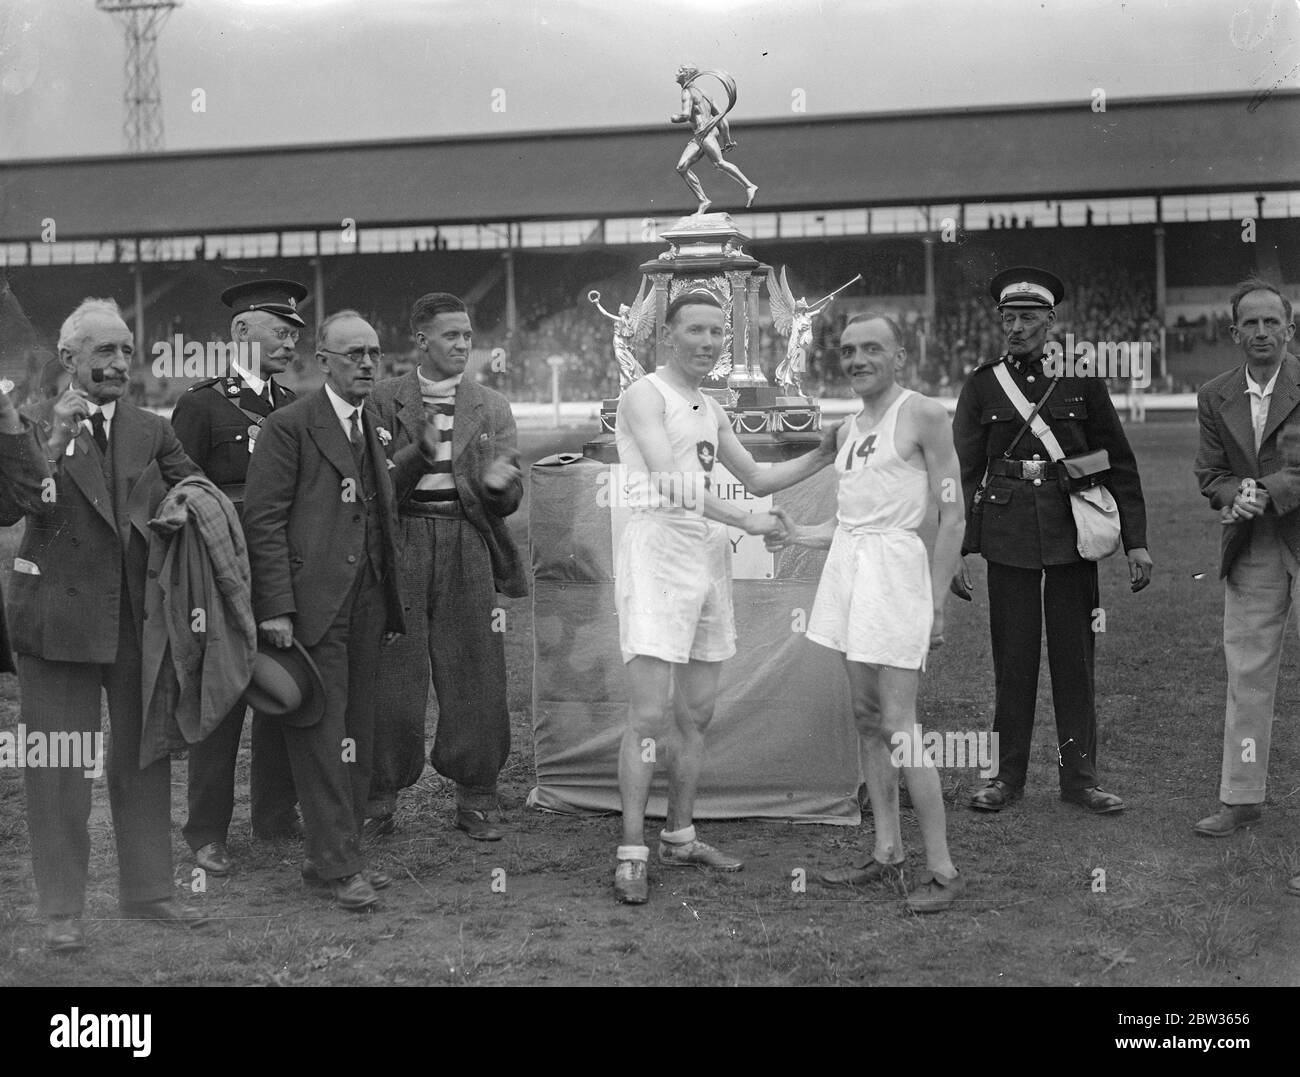 Sam Ferris wins Kinnaird Trophy Marathon race for eighth time . Sam Ferris , the Royal Air Force runner , won the Great Marathon race from Windsor to the White City , London , a distance of twenty six miles for the eighth time . Sam Ferris ( left ) winner of the Kinnaird Trophy shakes hands with the runner - up . 10 June 1933 Stock Photo